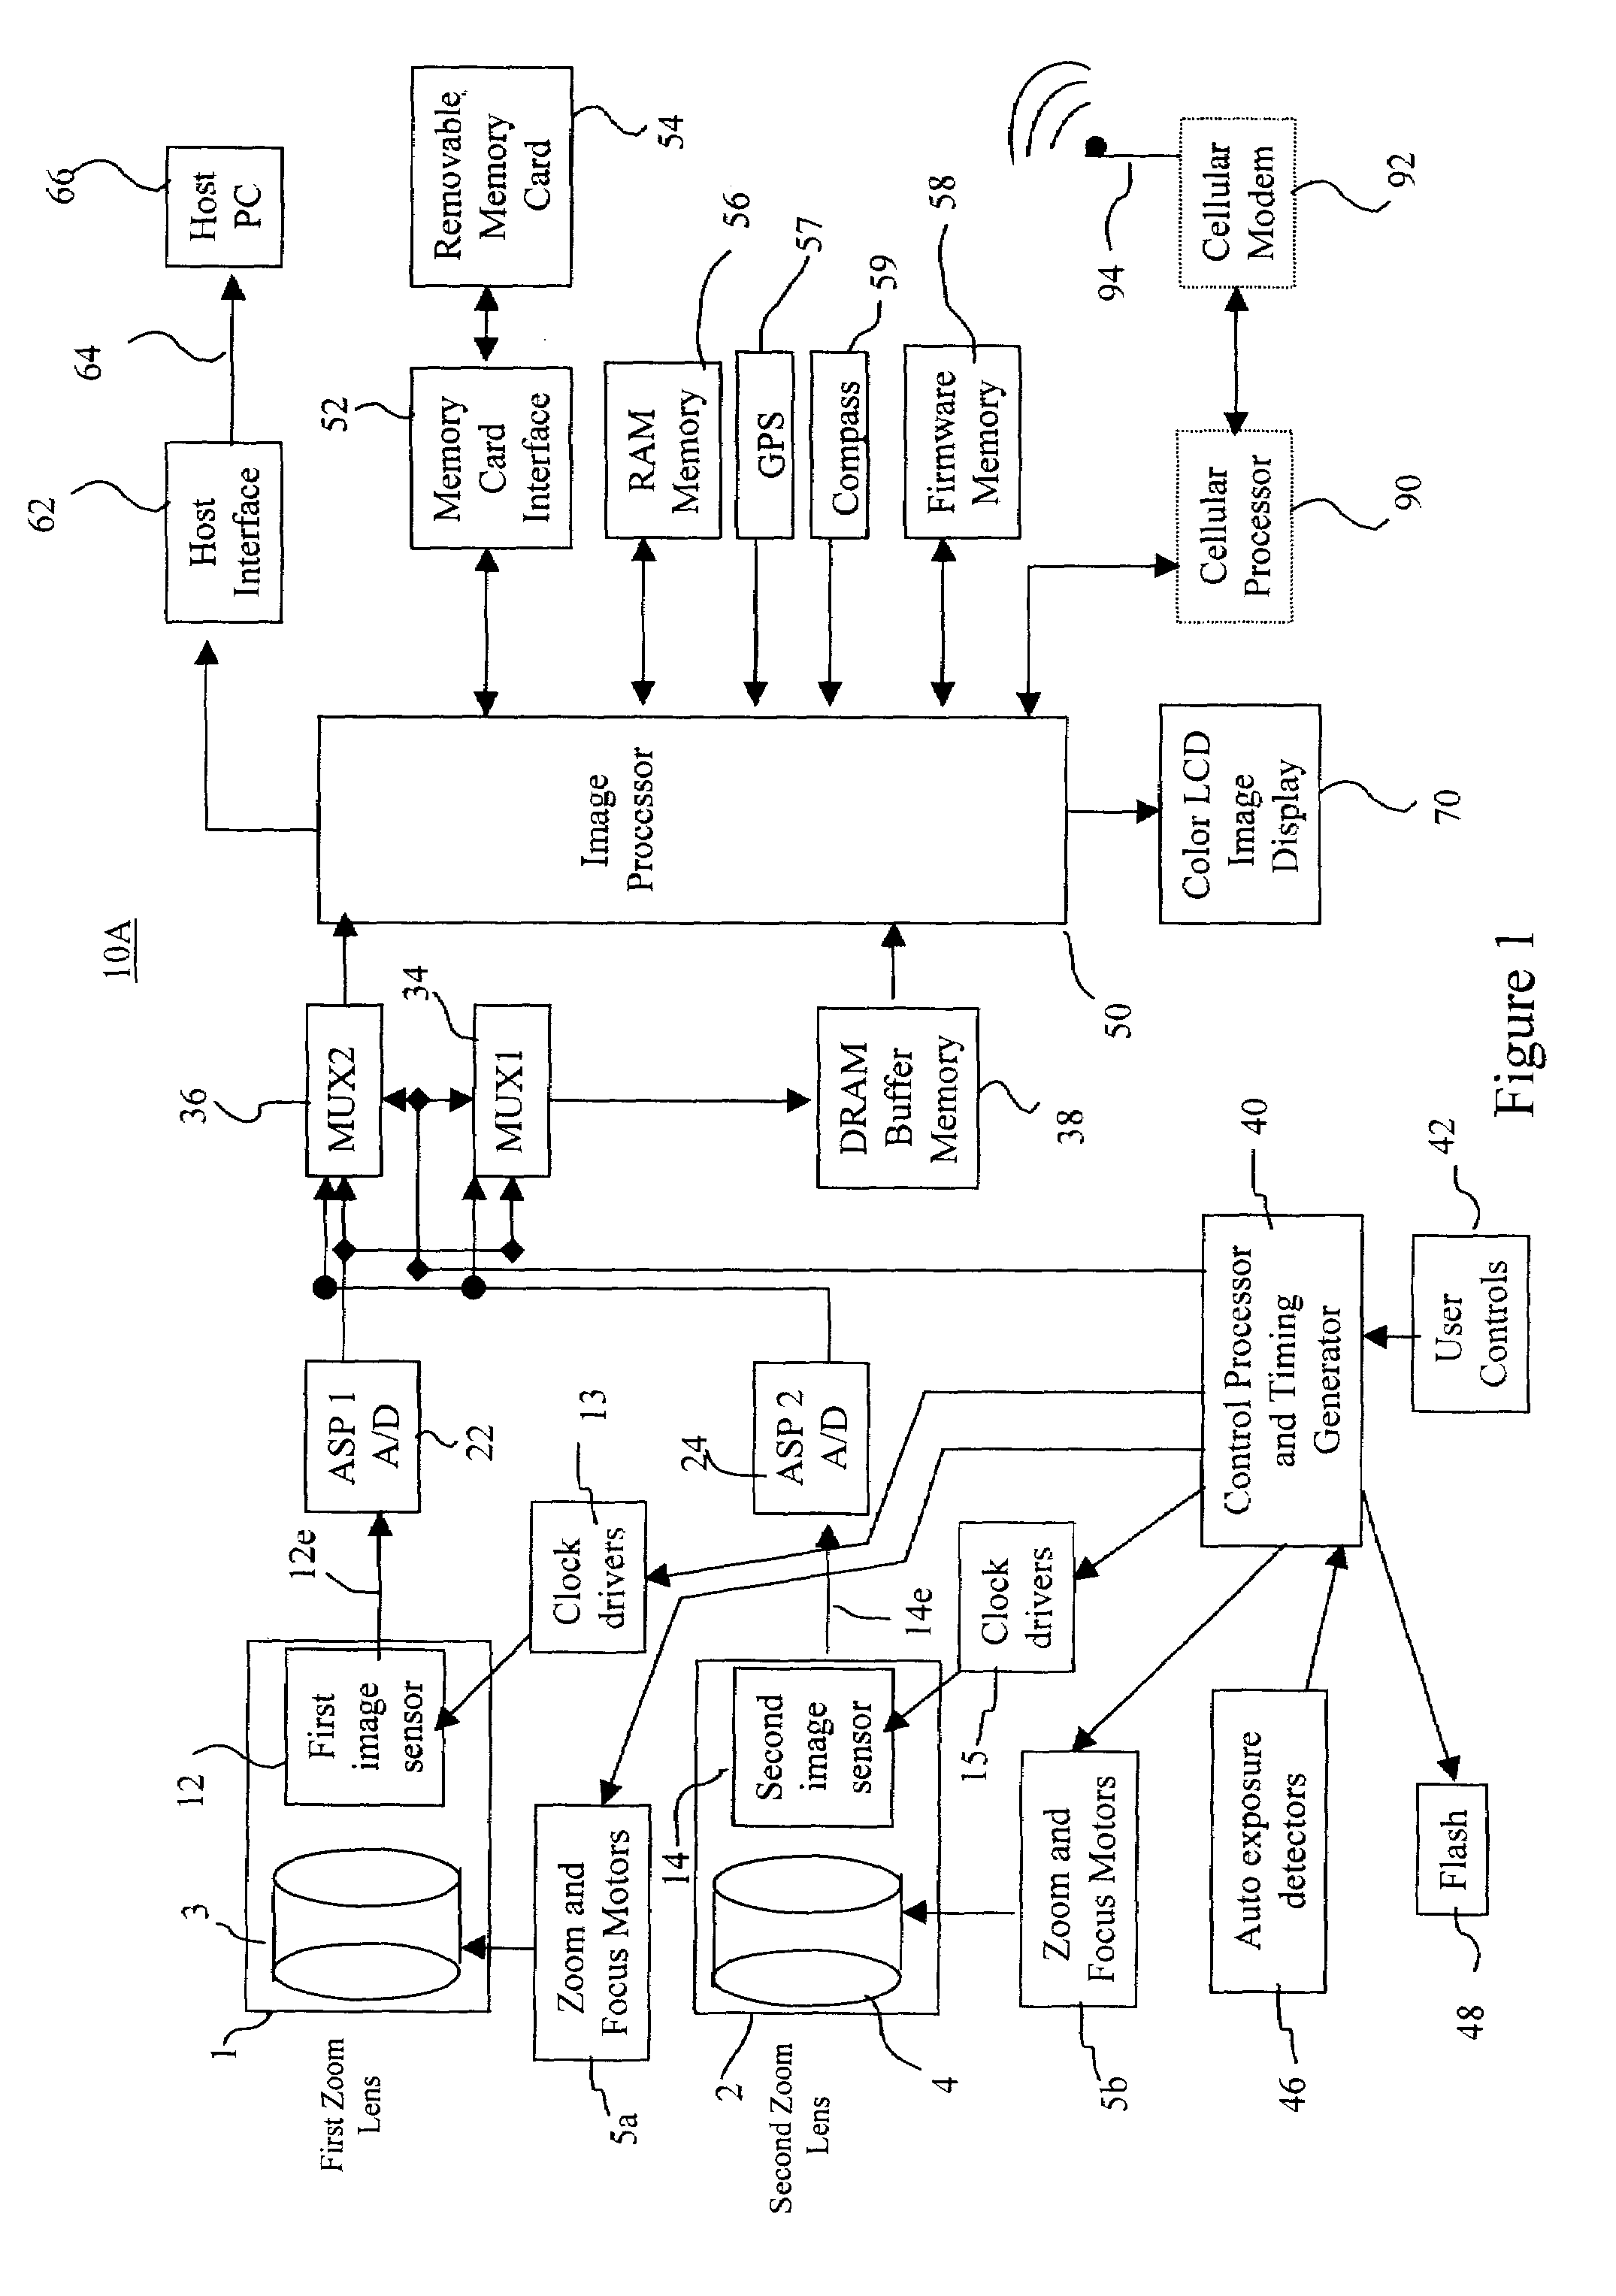 Camera using multiple lenses and image sensors operable in a default imaging mode